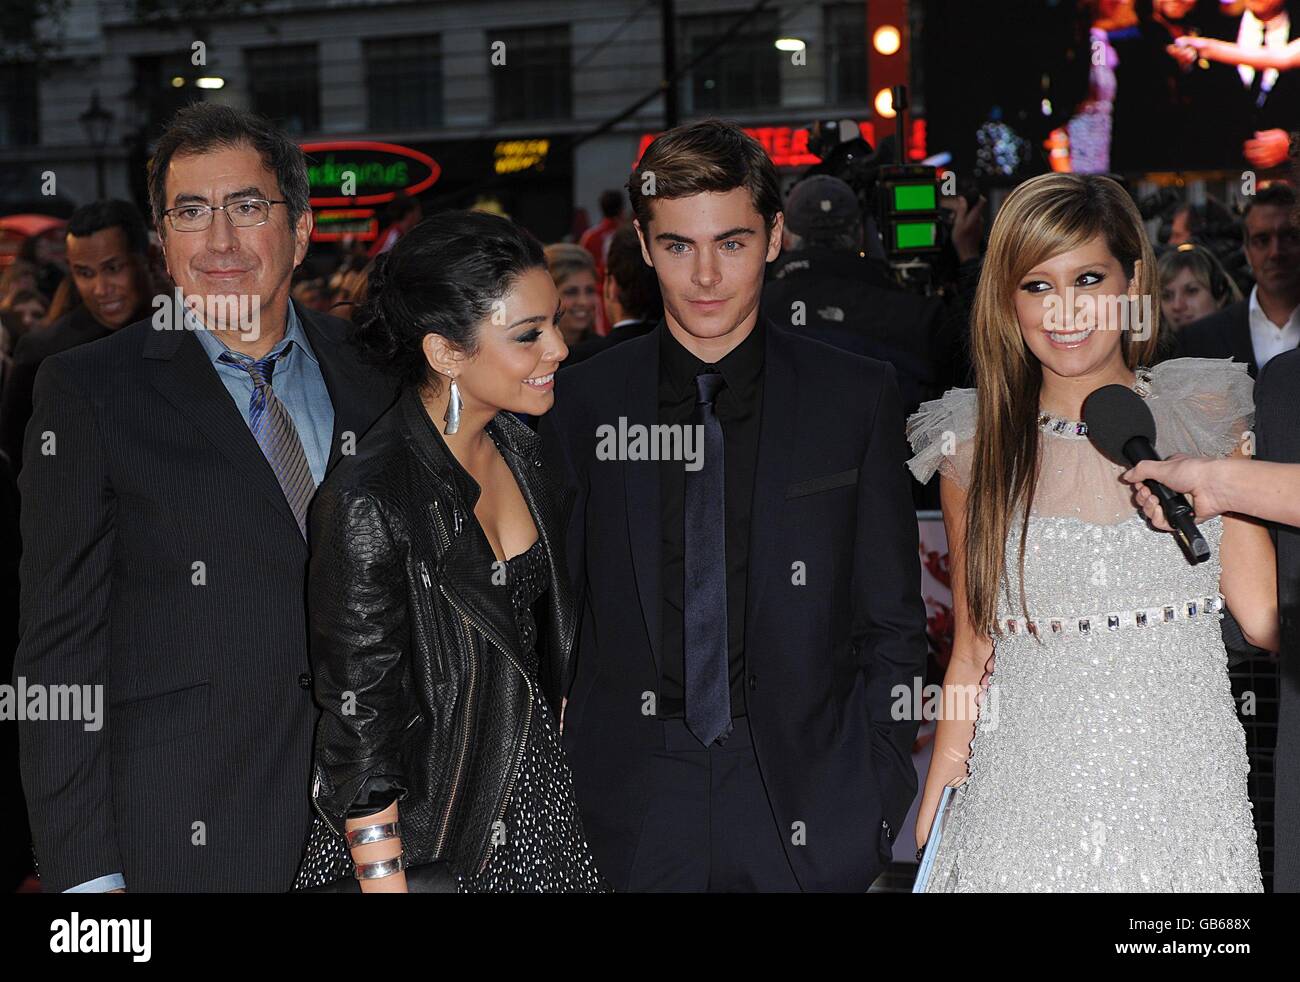 Director Kenny Ortega, Vanessa Hudgens, Zac Efron and Ashley Tisdale arrive for the UK premiere of 'High School Musical 3' at the Empire Leicester Square, London, WC2 Stock Photo